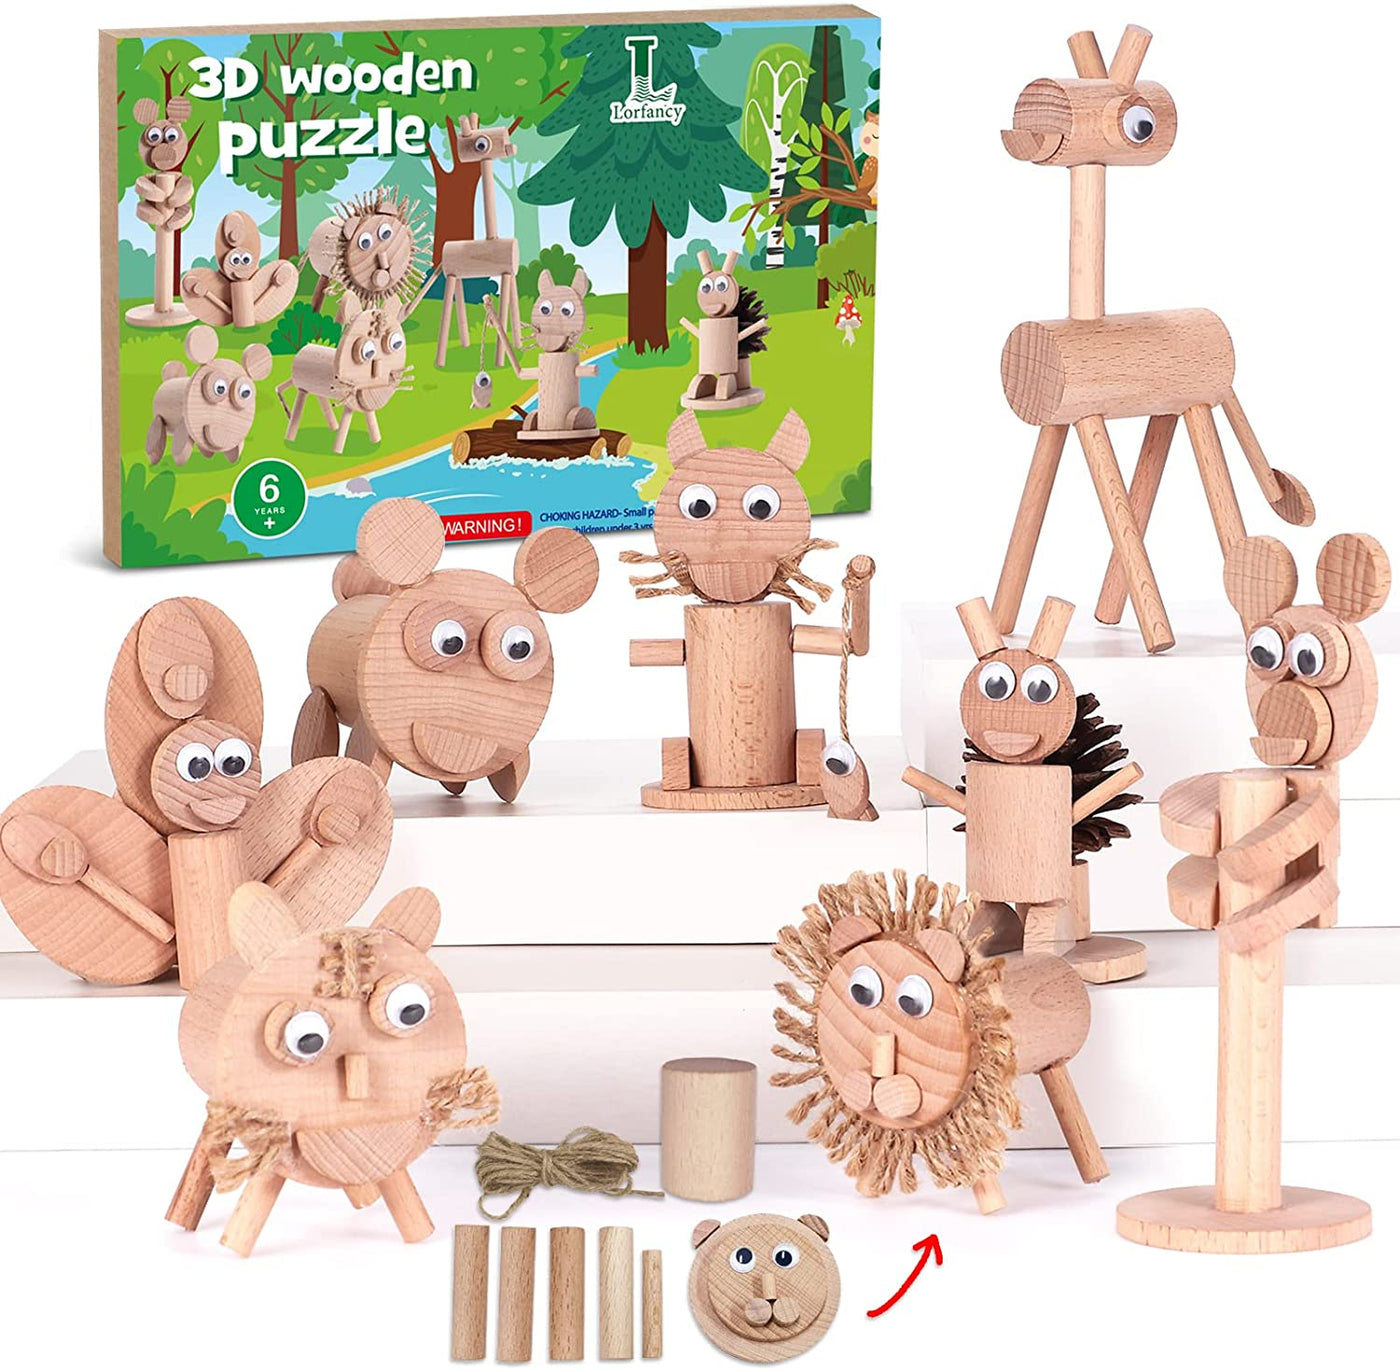 8 in 1 Craft Wooden Puzzle for Kids - DIY Stem Building